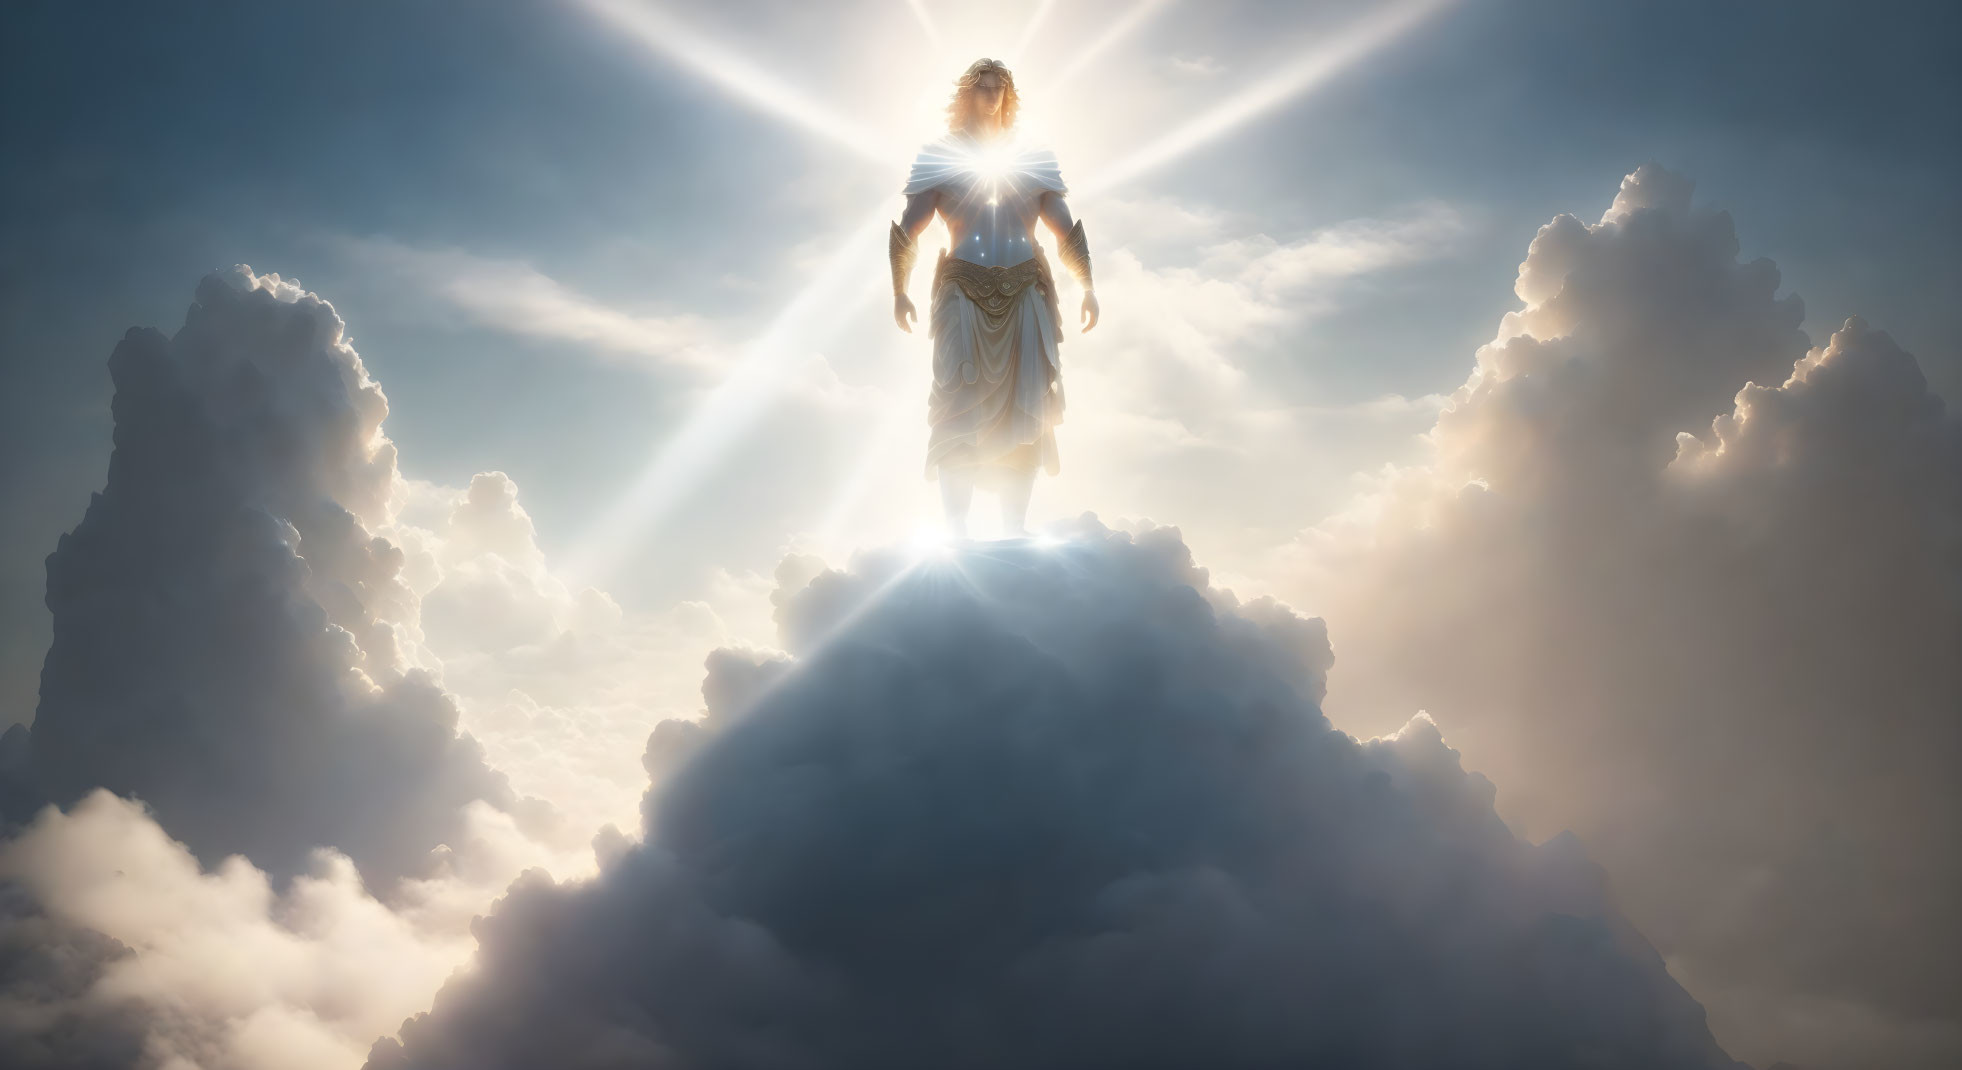 Majestic God in the clouds